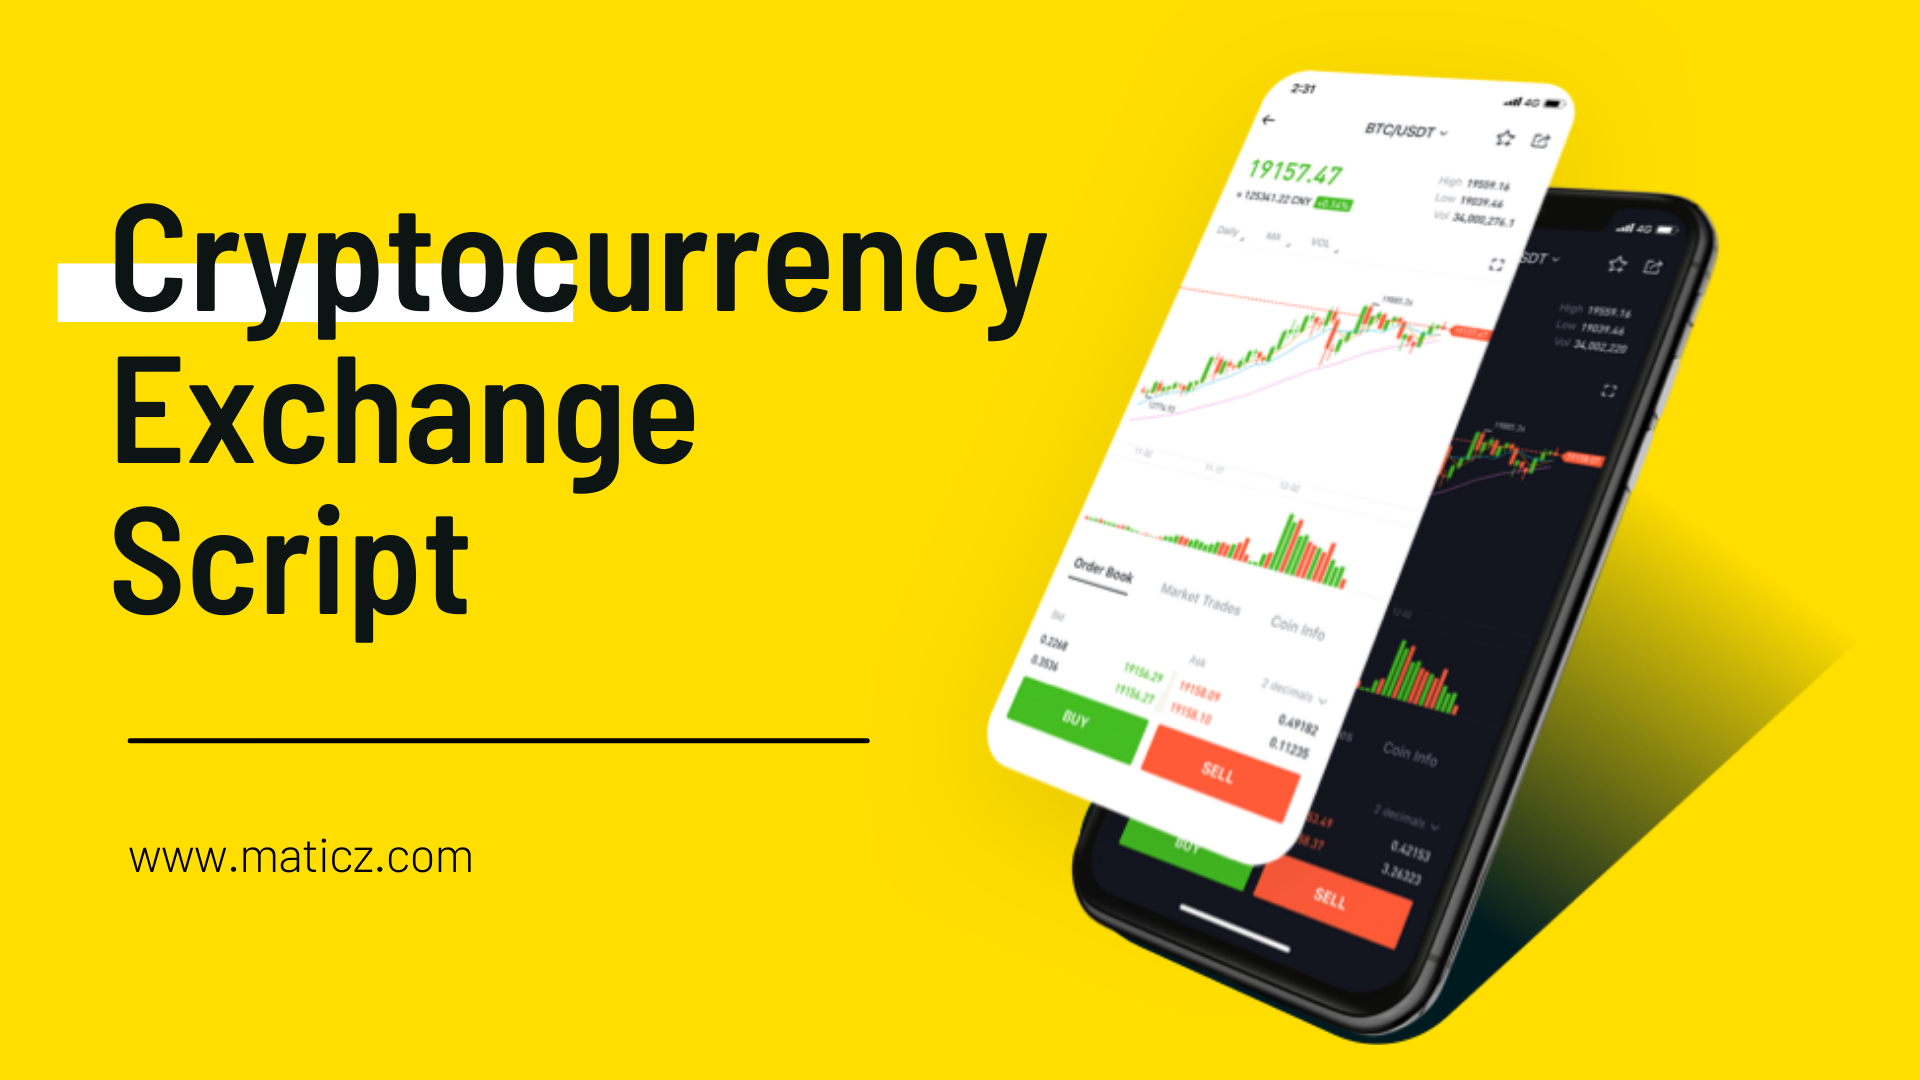 Cryptocurrency Exchange Script to Launch Bitcoin Exchange